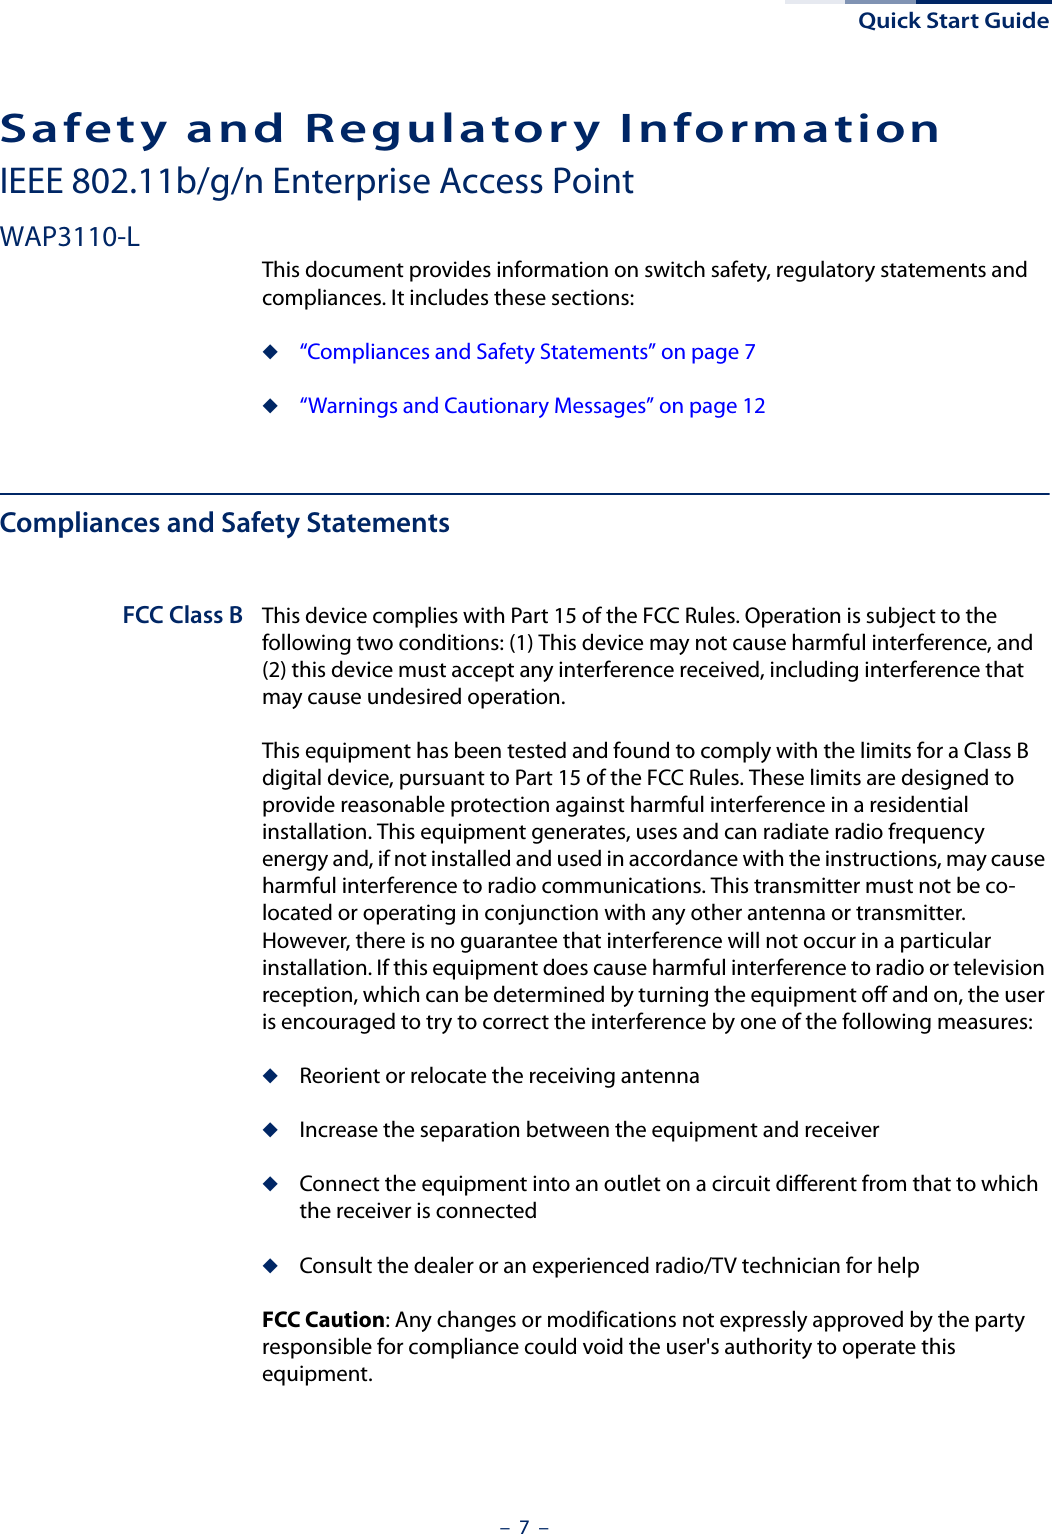 Quick Start Guide–  7  –Safety and Regulatory InformationIEEE 802.11b/g/n Enterprise Access PointWAP3110-LThis document provides information on switch safety, regulatory statements and compliances. It includes these sections:◆“Compliances and Safety Statements” on page 7◆“Warnings and Cautionary Messages” on page 12Compliances and Safety StatementsFCC Class B This device complies with Part 15 of the FCC Rules. Operation is subject to the following two conditions: (1) This device may not cause harmful interference, and (2) this device must accept any interference received, including interference that may cause undesired operation.This equipment has been tested and found to comply with the limits for a Class B digital device, pursuant to Part 15 of the FCC Rules. These limits are designed to provide reasonable protection against harmful interference in a residential installation. This equipment generates, uses and can radiate radio frequency energy and, if not installed and used in accordance with the instructions, may cause harmful interference to radio communications. This transmitter must not be co-located or operating in conjunction with any other antenna or transmitter. However, there is no guarantee that interference will not occur in a particular installation. If this equipment does cause harmful interference to radio or television reception, which can be determined by turning the equipment off and on, the user is encouraged to try to correct the interference by one of the following measures:◆Reorient or relocate the receiving antenna◆Increase the separation between the equipment and receiver◆Connect the equipment into an outlet on a circuit different from that to which the receiver is connected◆Consult the dealer or an experienced radio/TV technician for helpFCC Caution: Any changes or modifications not expressly approved by the party responsible for compliance could void the user&apos;s authority to operate this equipment. 